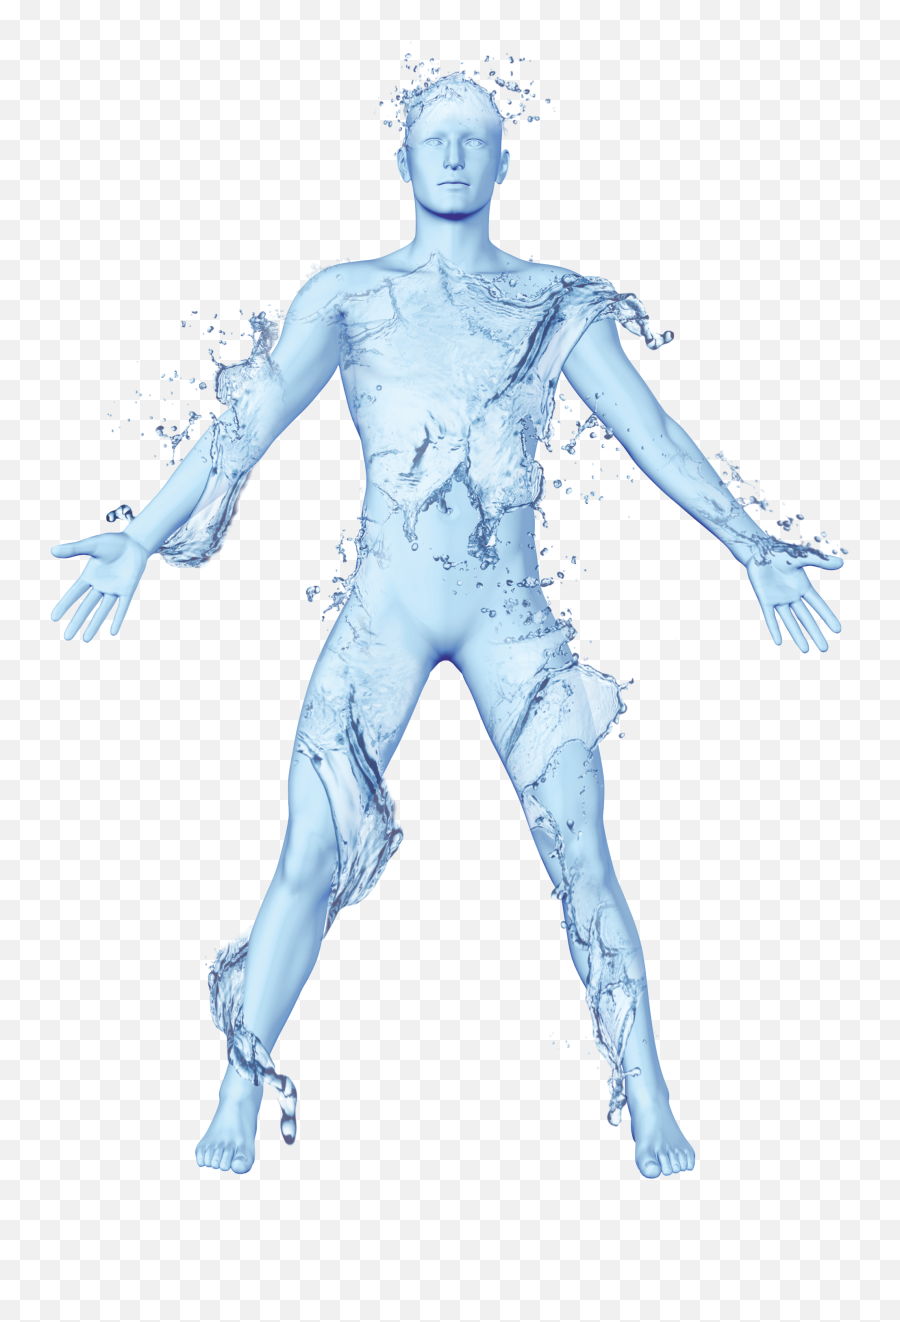 Water And Its Effect - Newhumansolutioncom Illustration Png,Water Effect Png